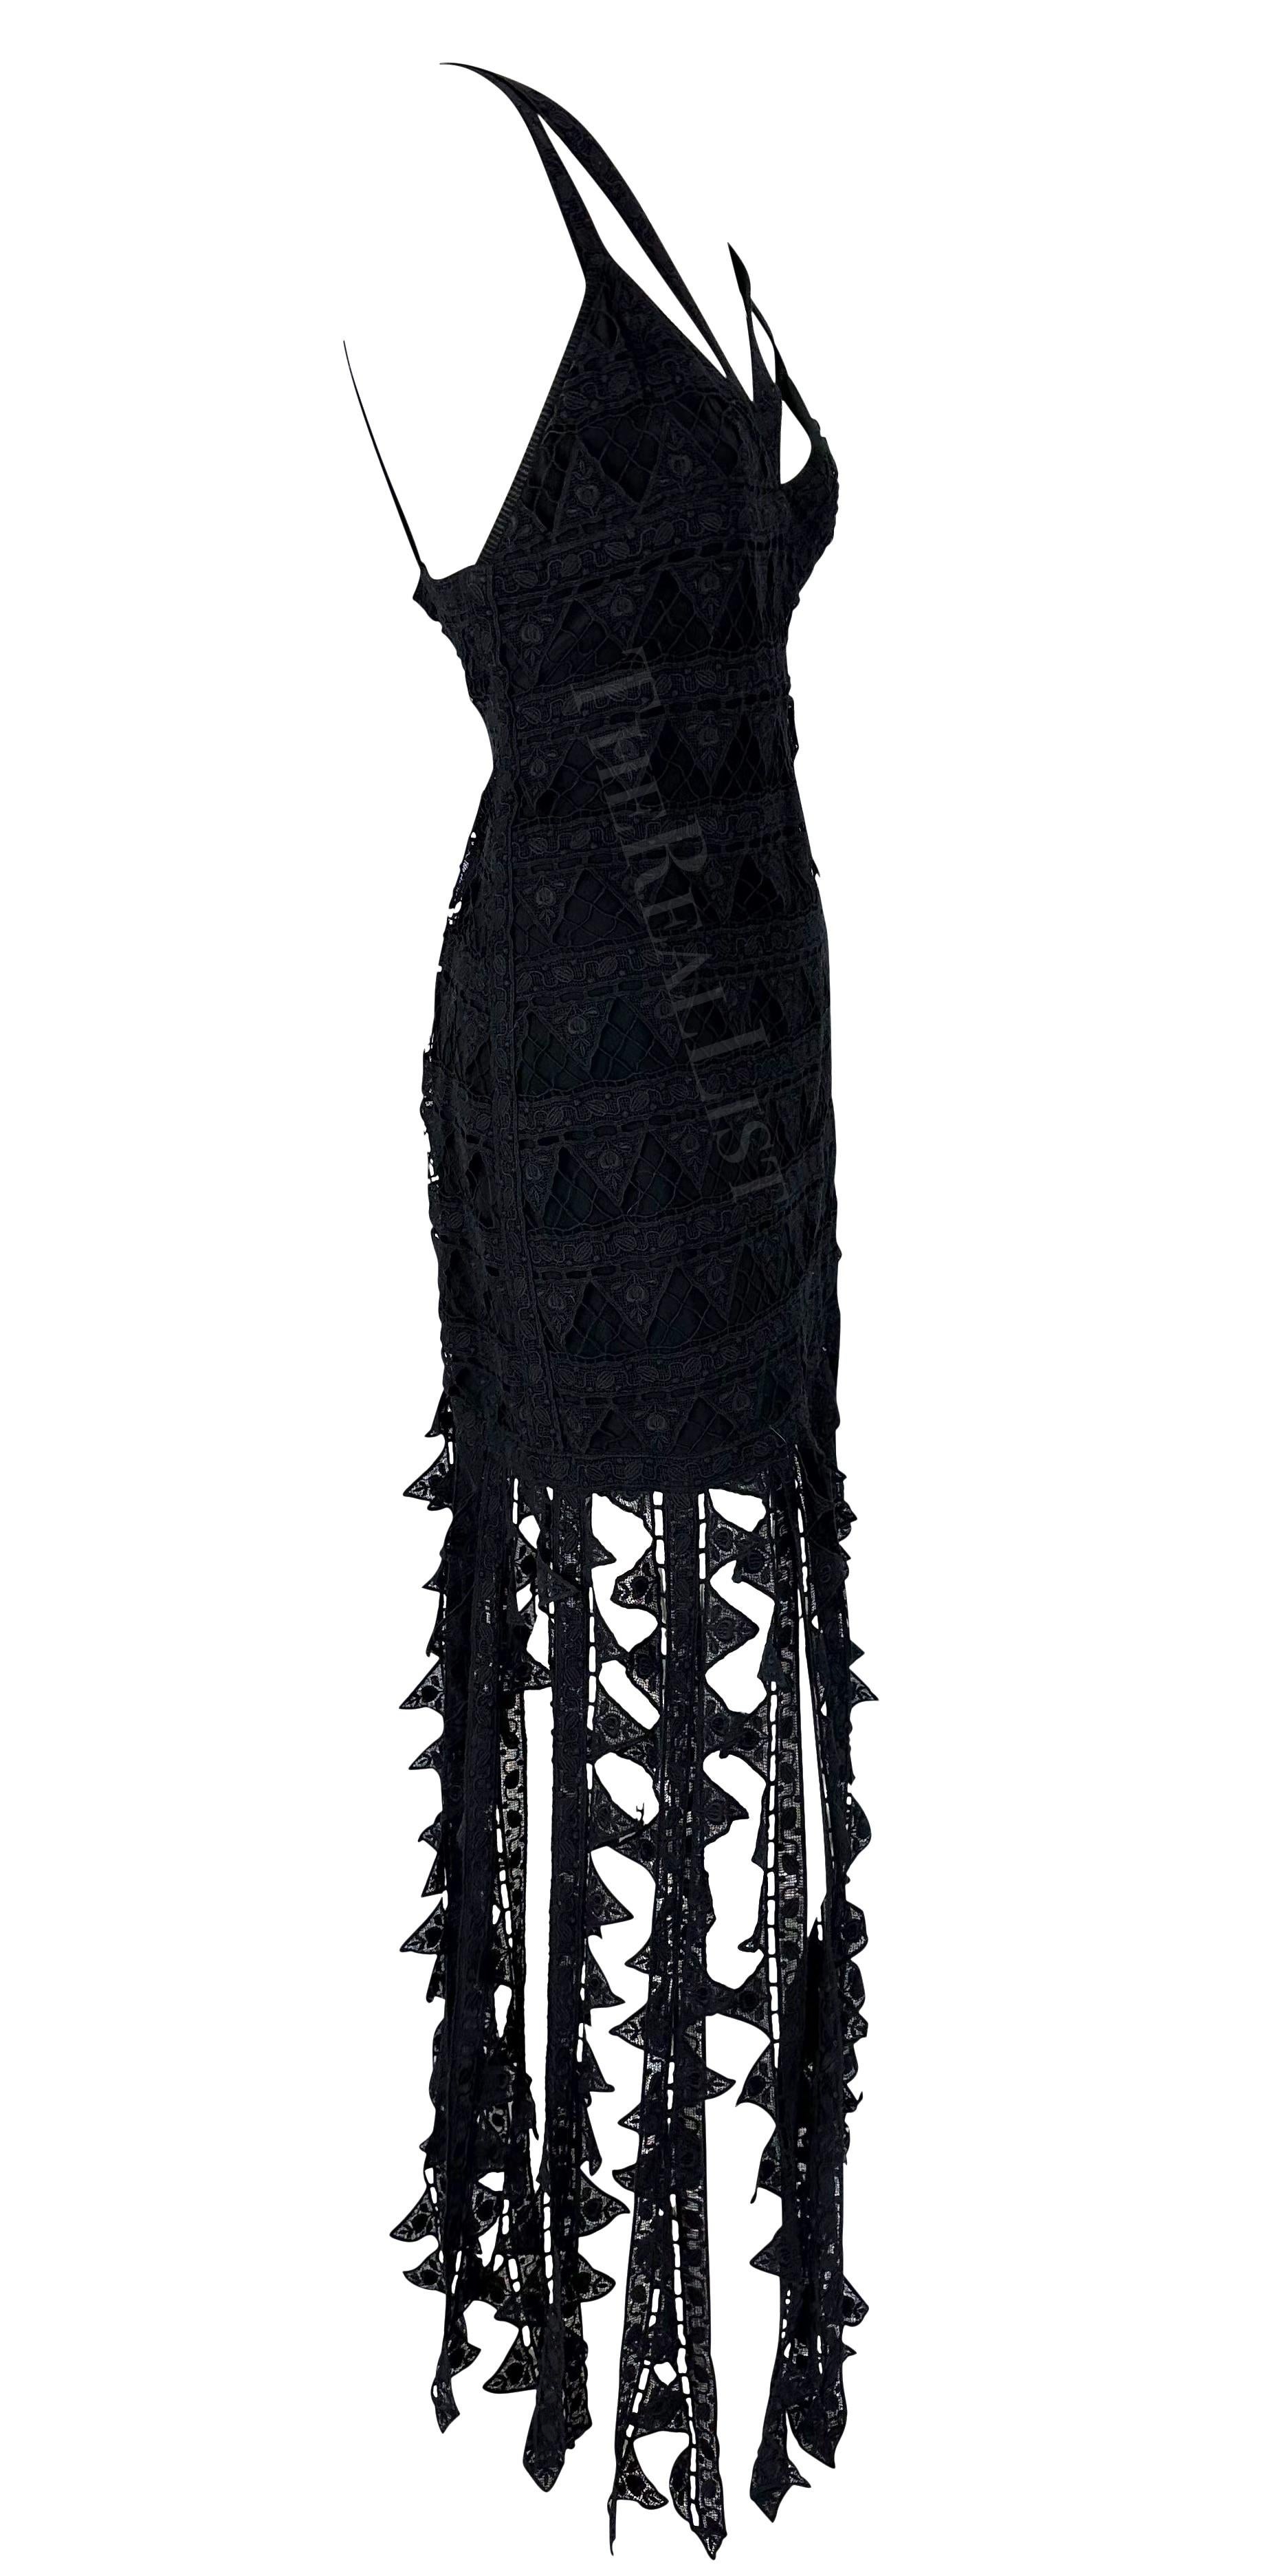 S/S 1993 Chloé by Karl Lagerfeld Runway Black Floral Triangle Lace Dress For Sale 5